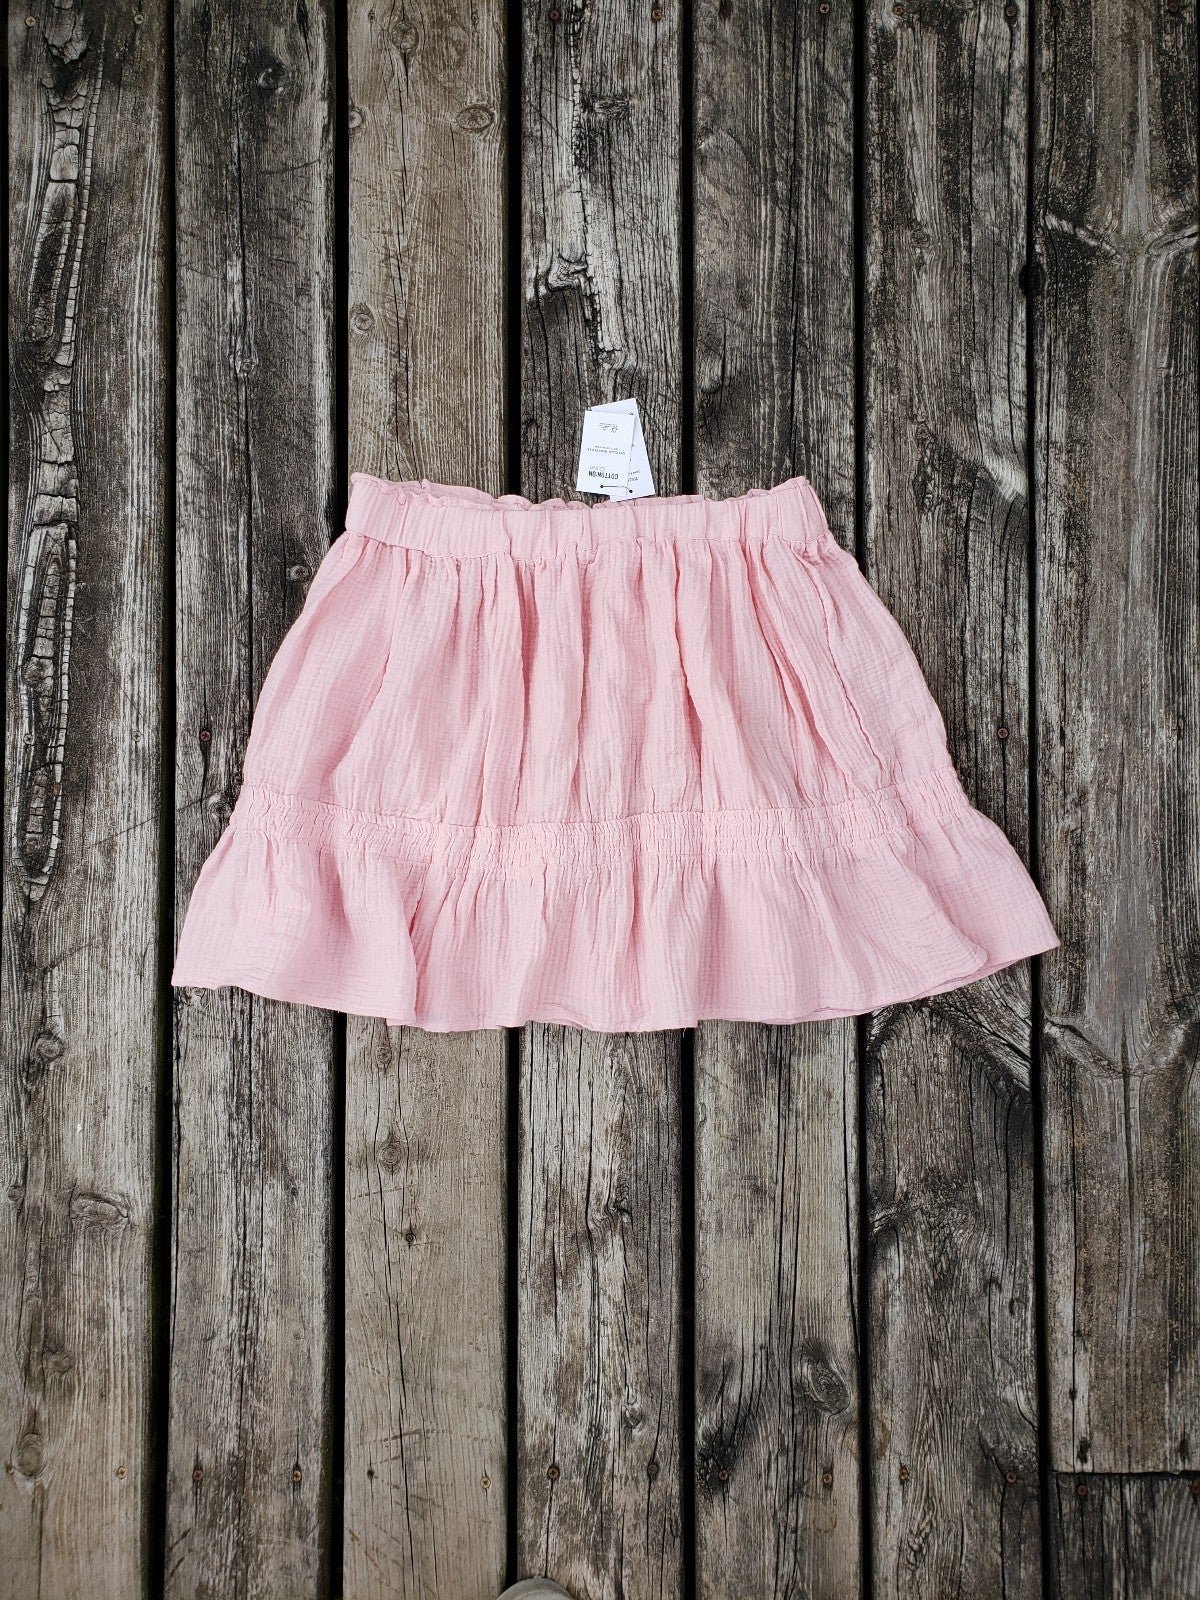 floor price Brand new!! NWT women´s Cotton On stretchy pink ruffle skirt size 12 PCvyF6CIF for sale